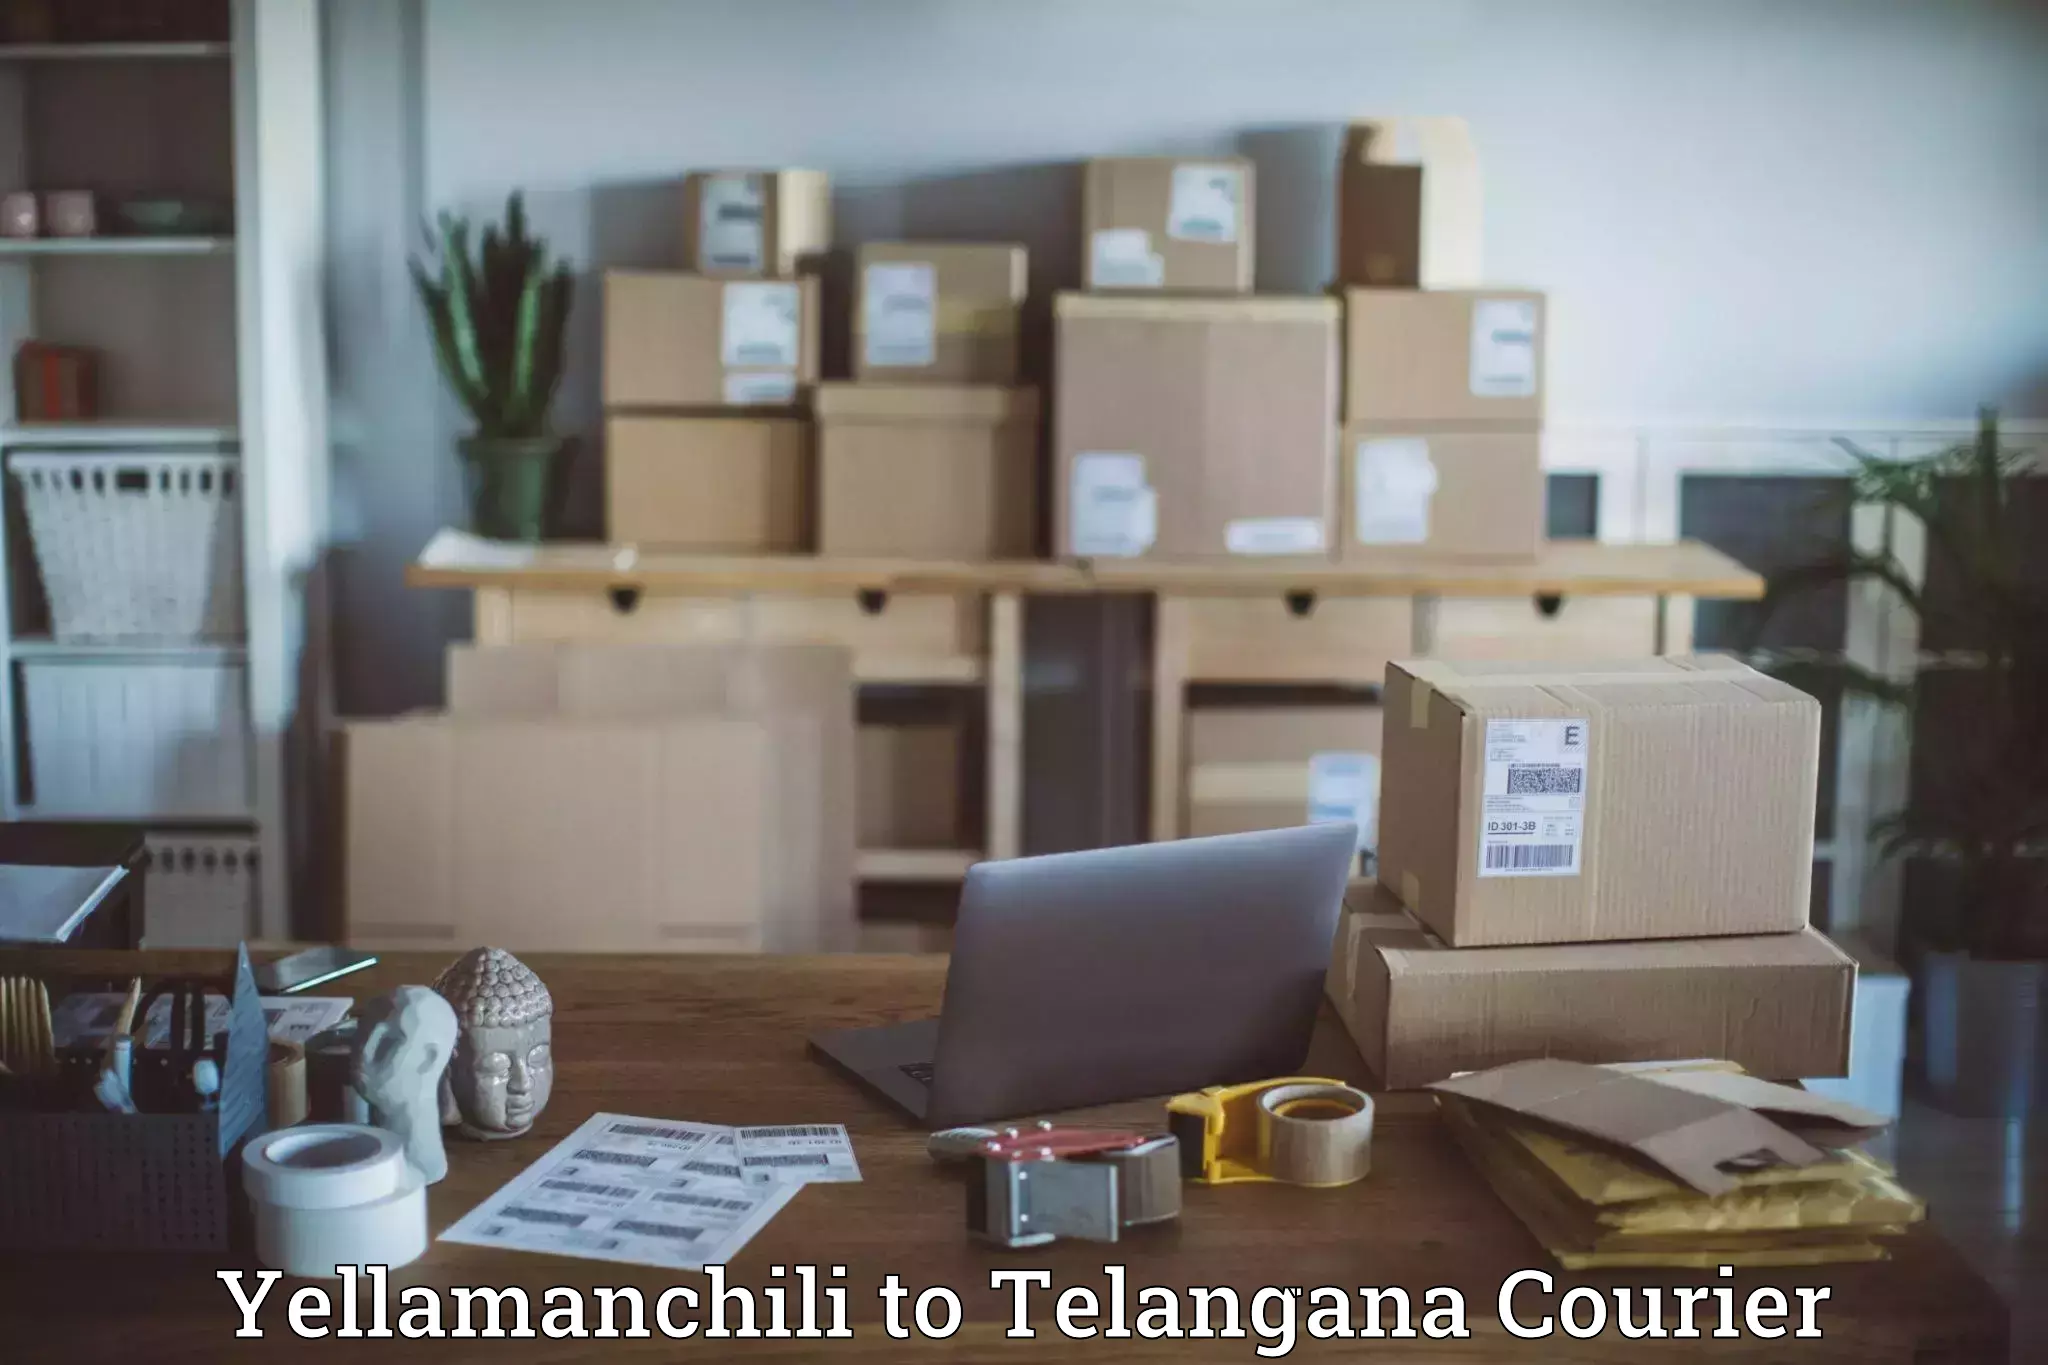 Subscription-based courier Yellamanchili to Metpally